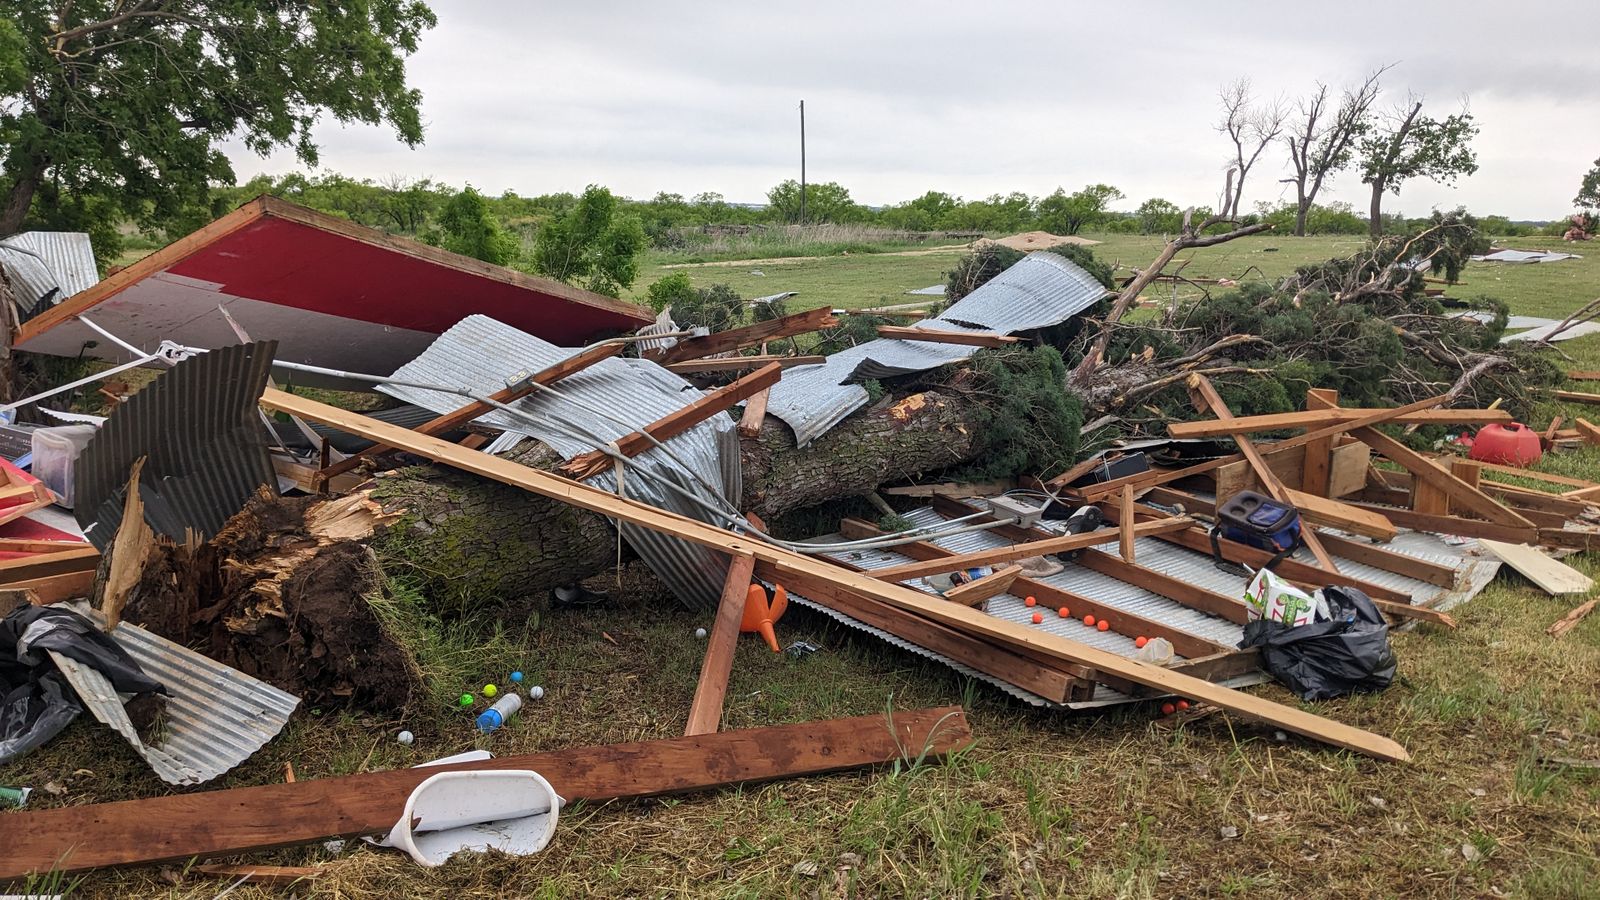 A powerful anticyclonic tornado uprooted trees and damaged some buildings on the night of April 30, and a second unusual twister changed direction, do